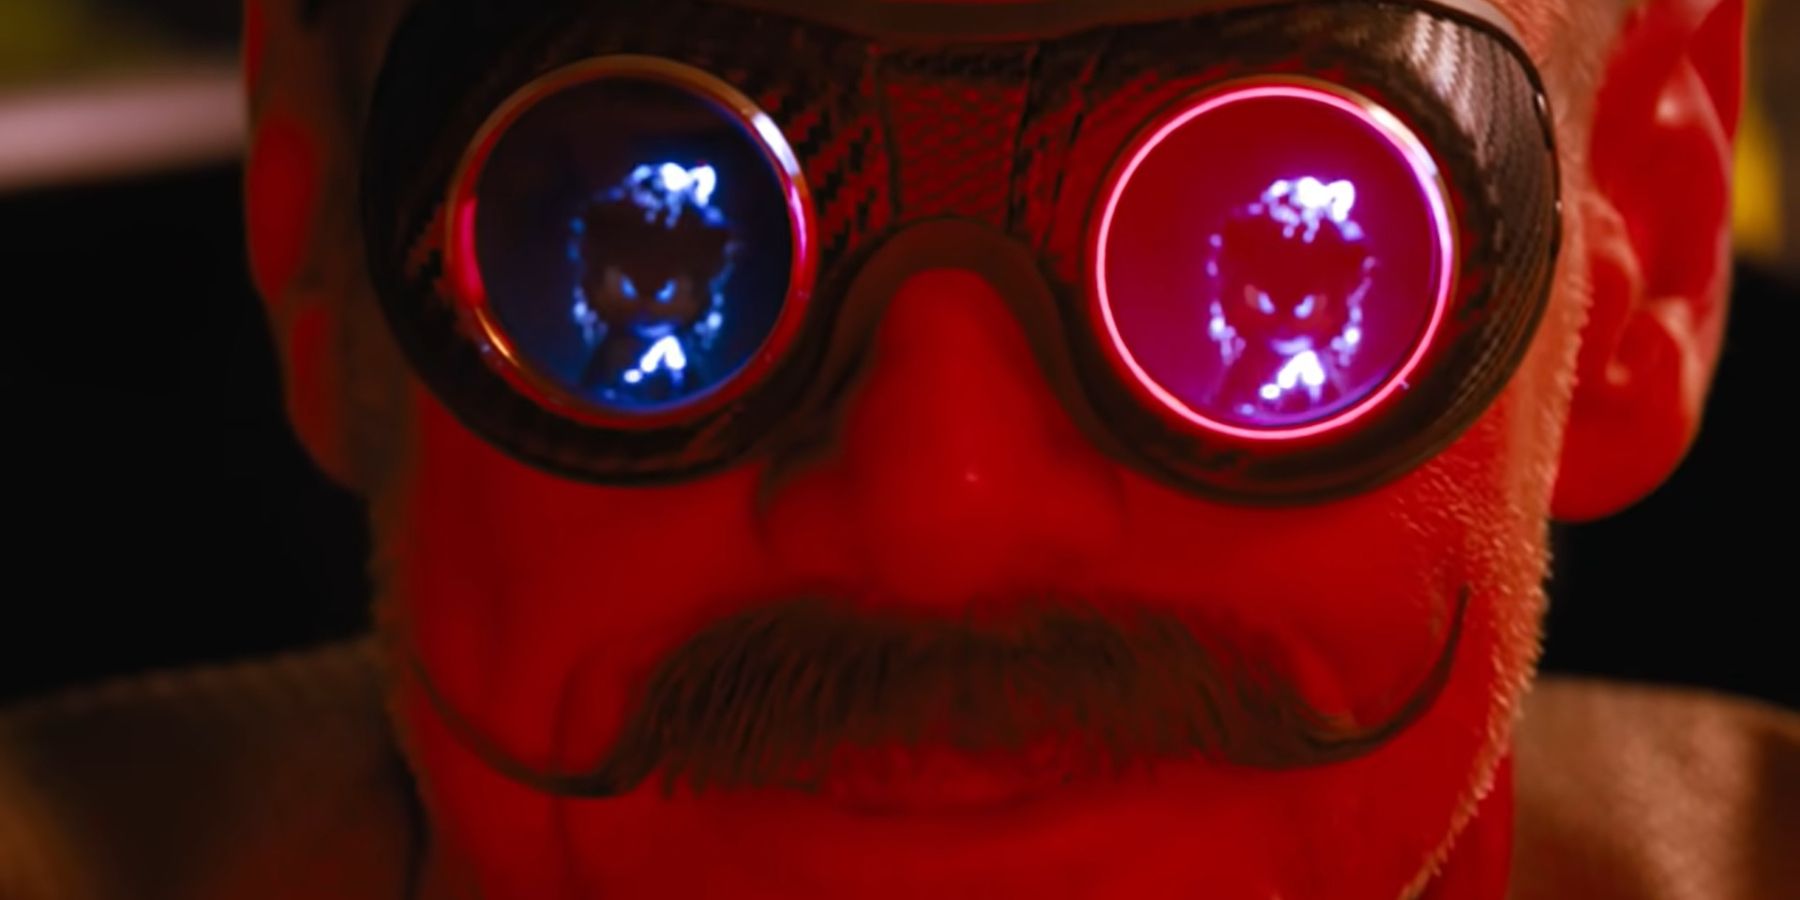 Dr. Robotnik glaring at Sonic with Sonic's reflection in the goggles in Sonic The Hedgehog